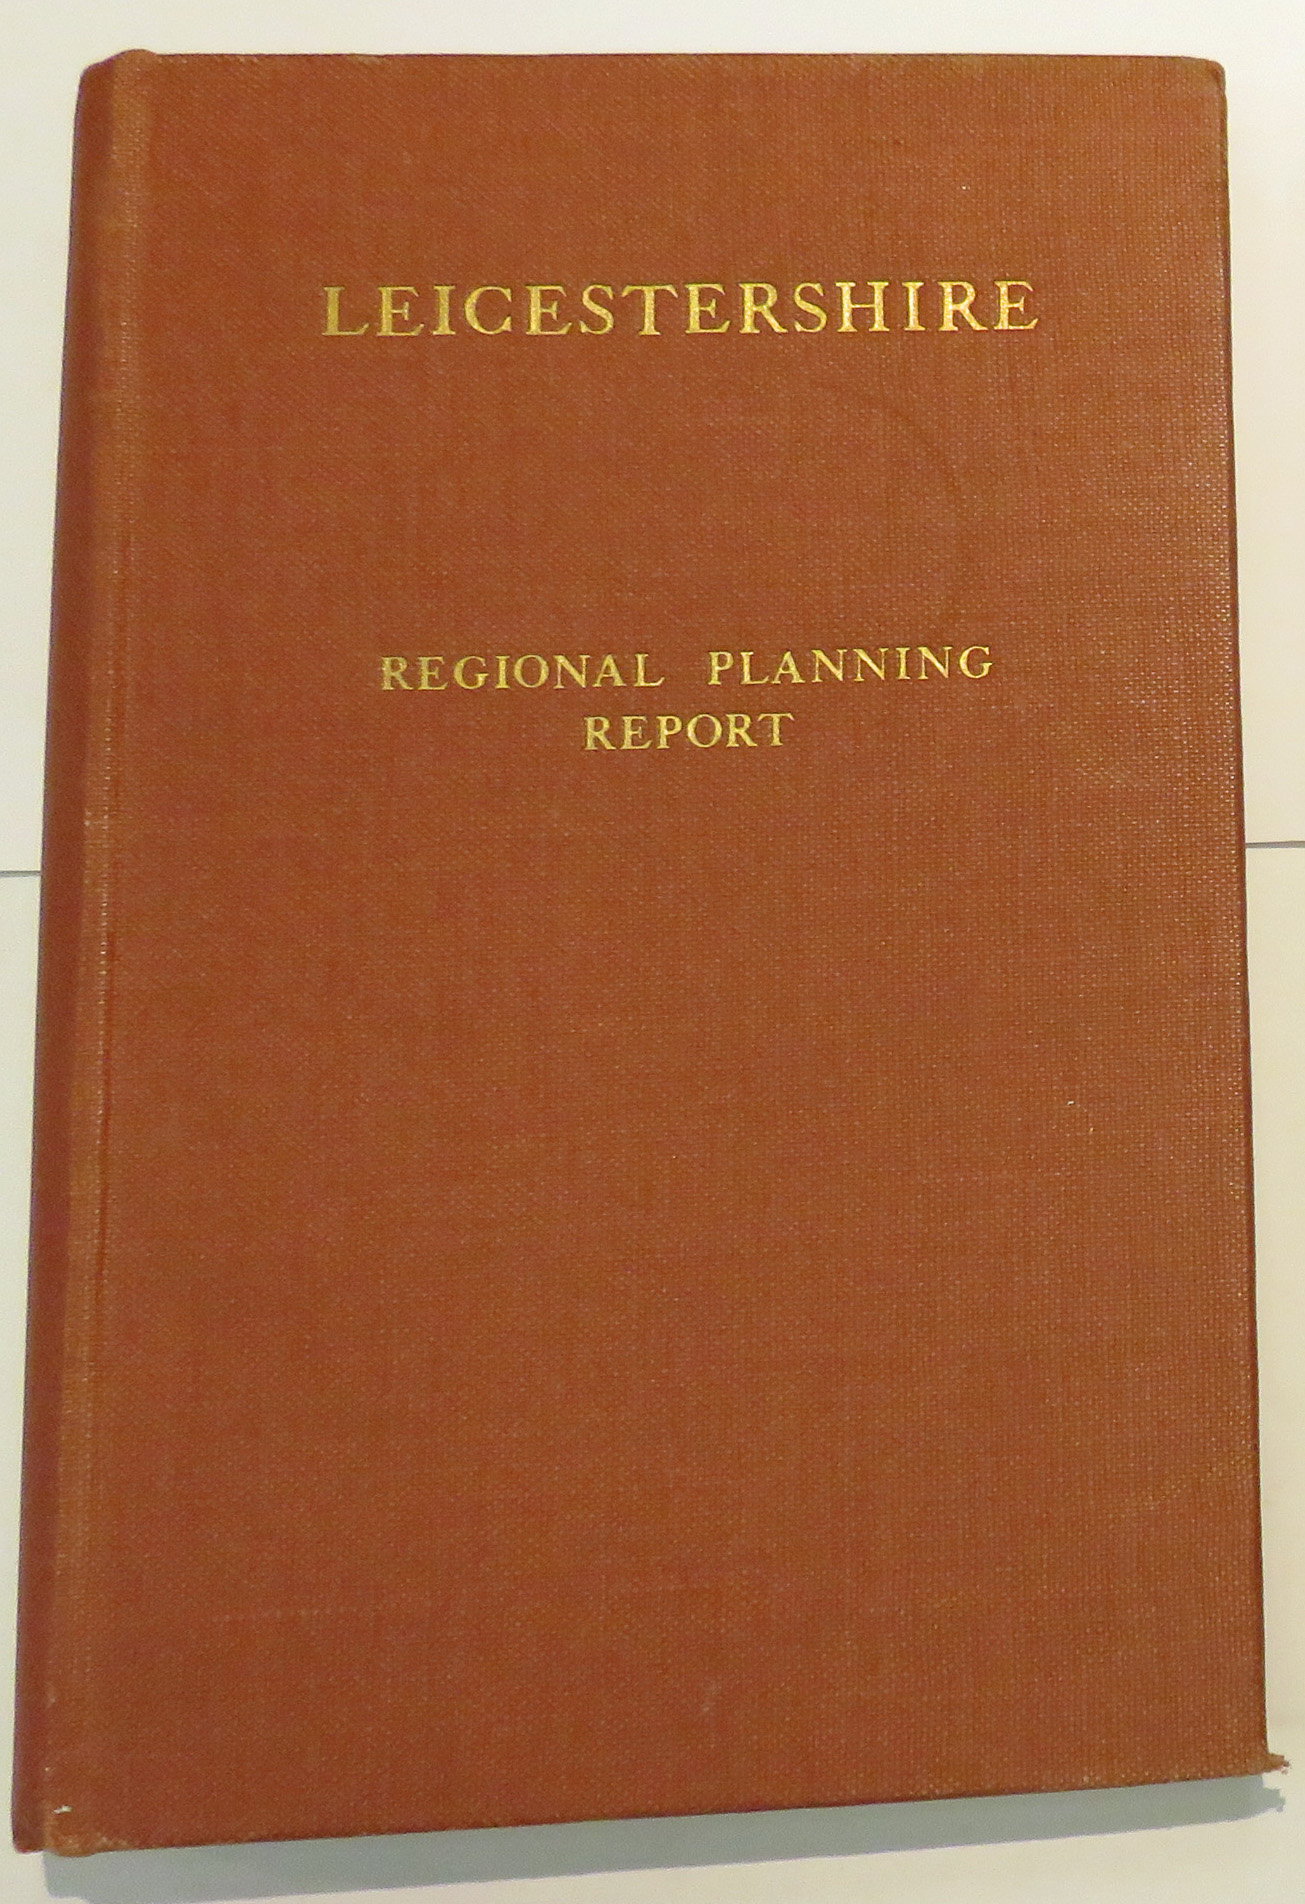 Leicestershire Regional Town Planning Joint Advisory Committee Regional Planning Report 